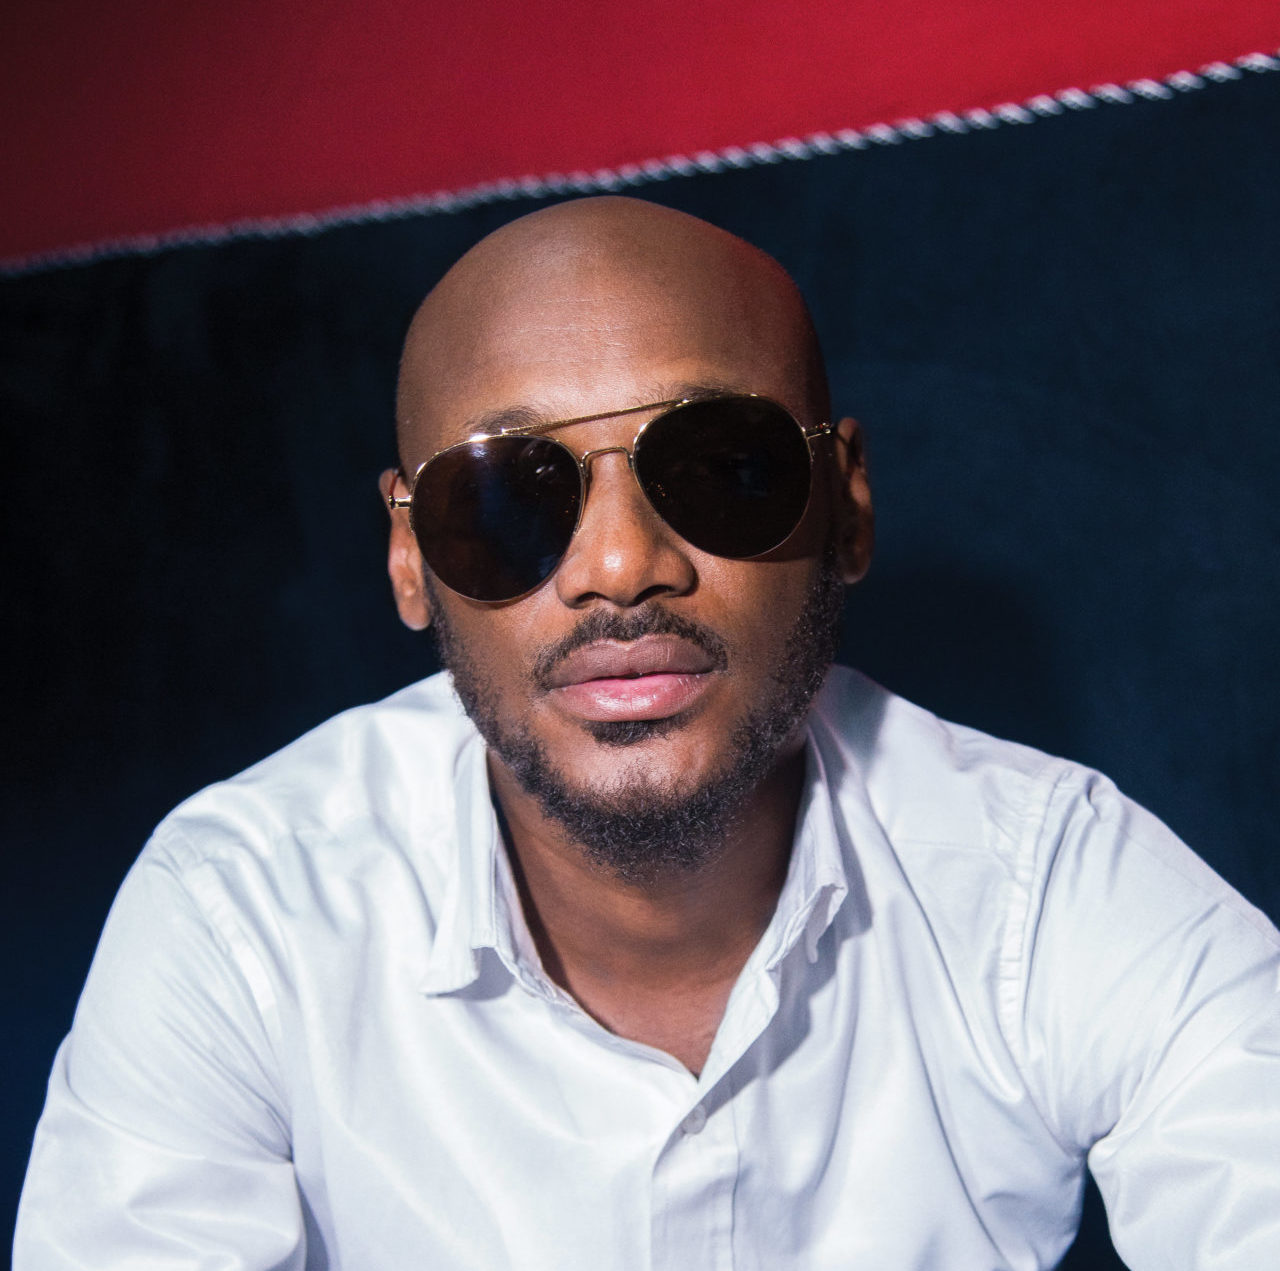 2Baba: The legend of the new era in the Nigeria music industry